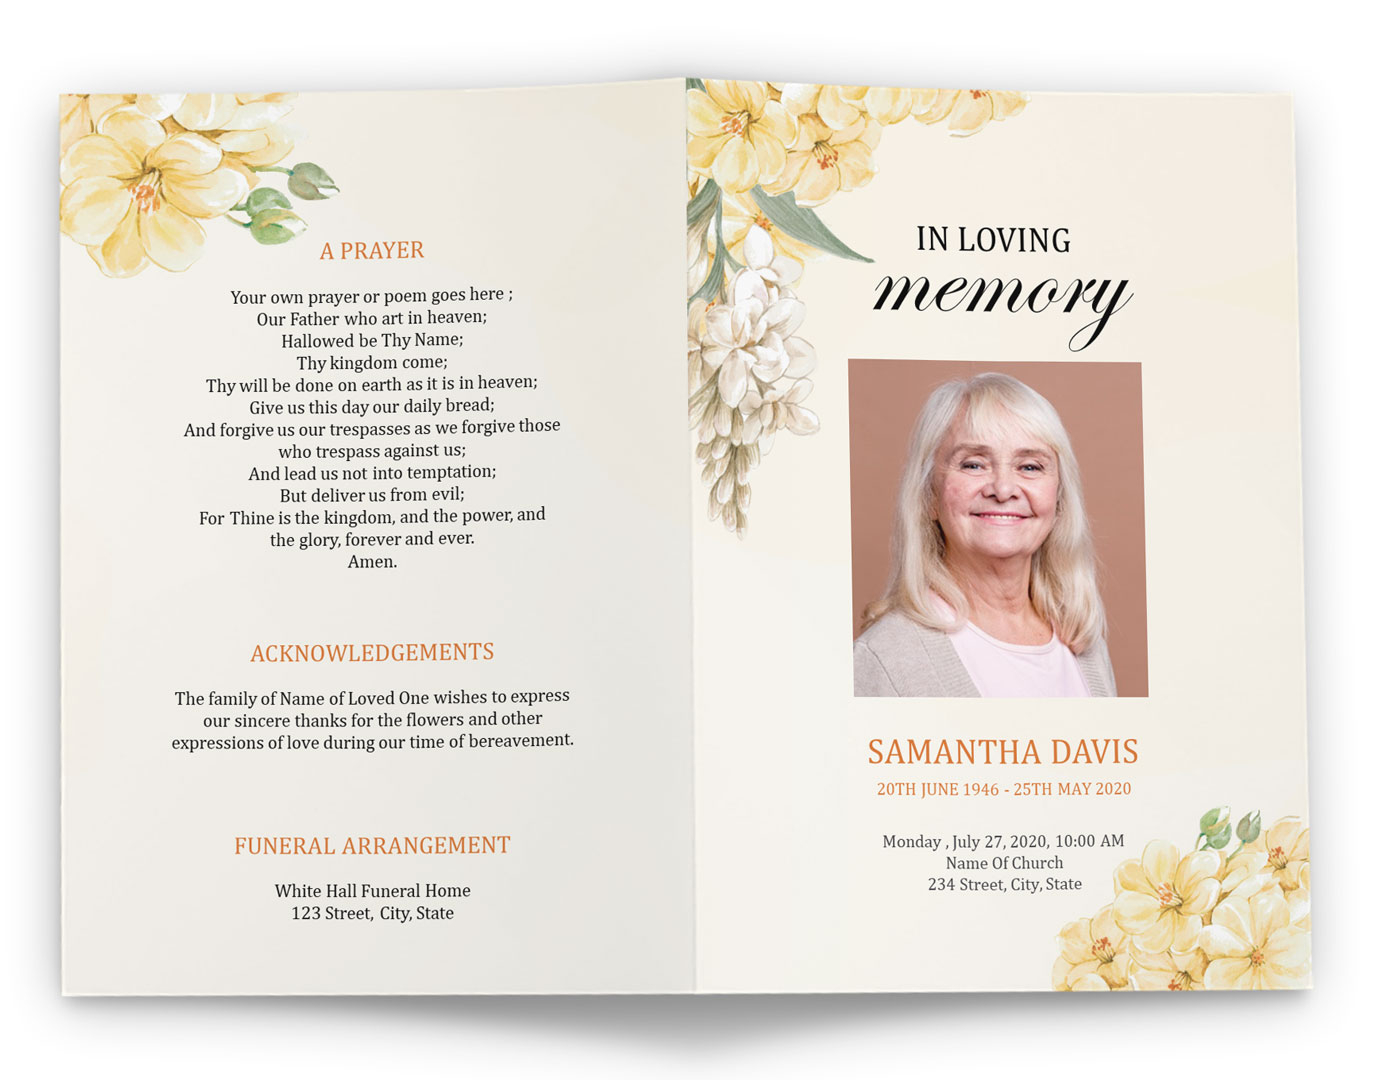 New Funeral Brochure Template For A Custom Funeral Program With Regard To Memorial Brochure Template